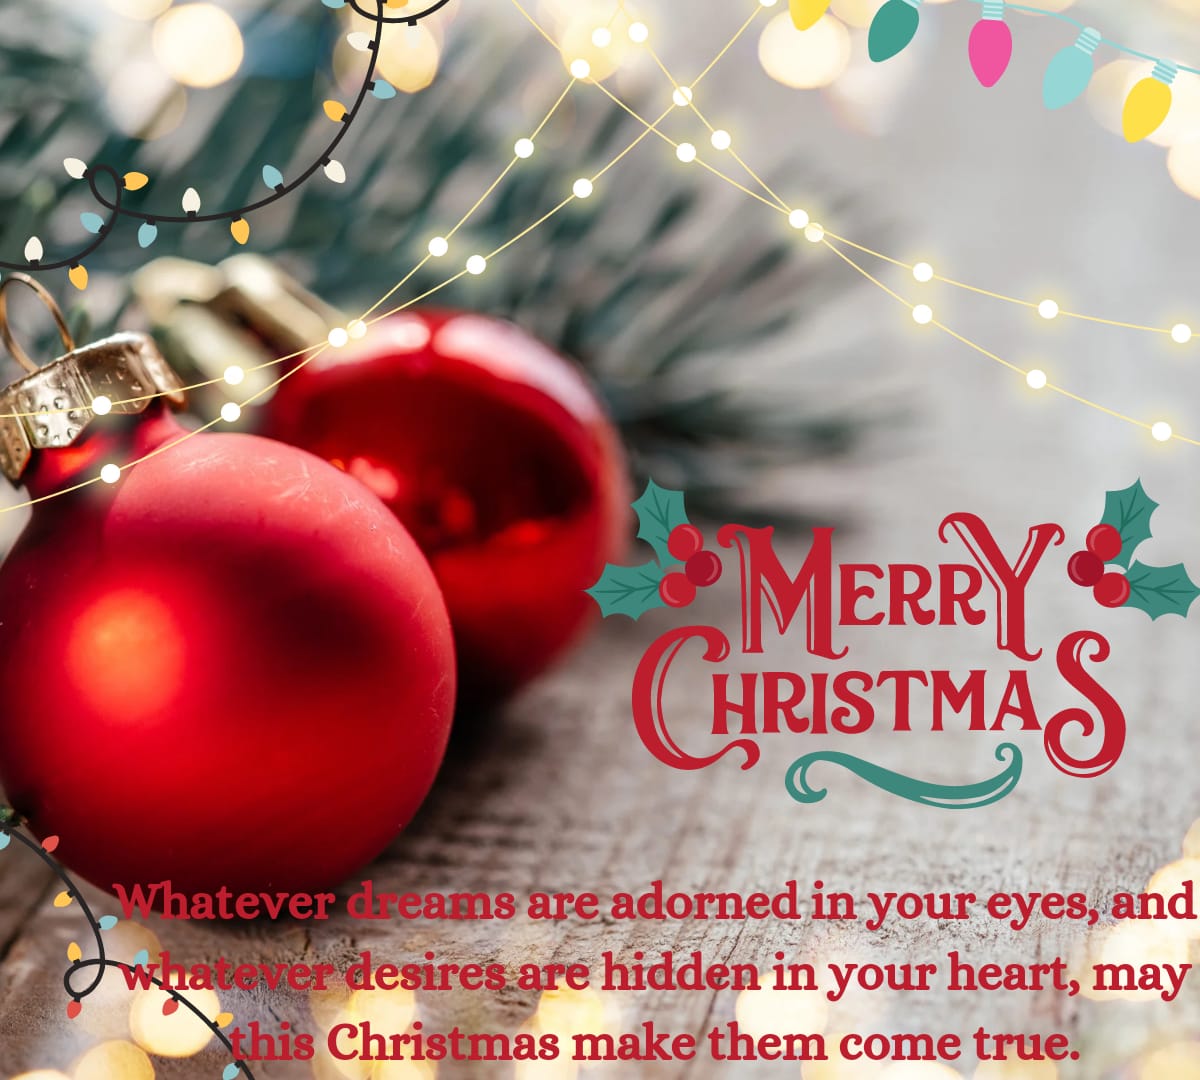 Merry Christmas greetings message for husband